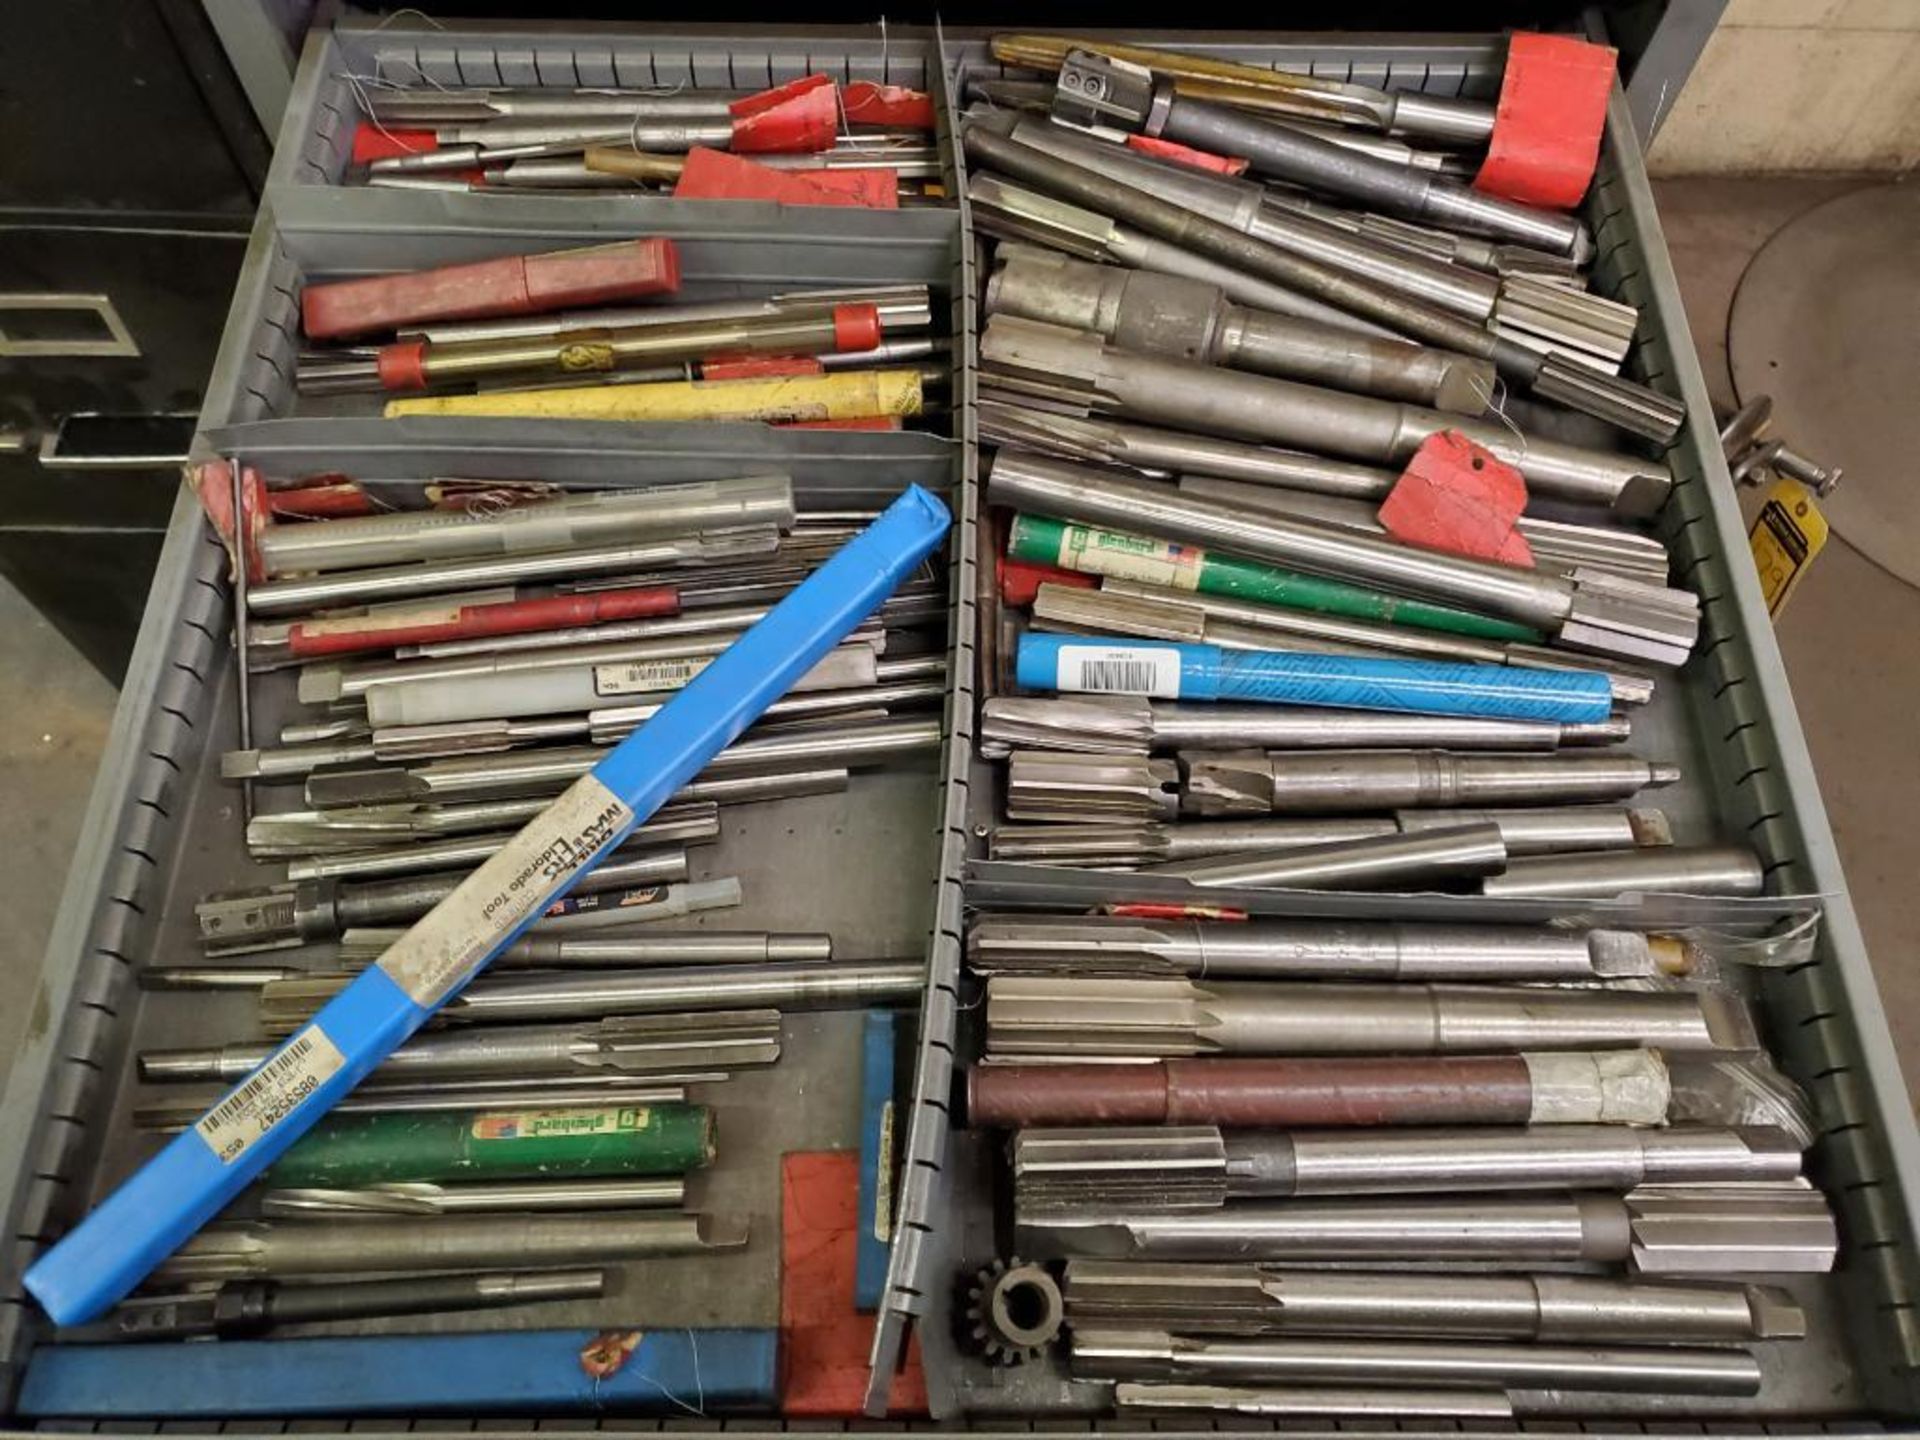 8-Drawer Modular Tool Cabinet Full of Perishable Tooling; Reamers, Cutters, Flutes, Mills, Countersi - Image 7 of 17